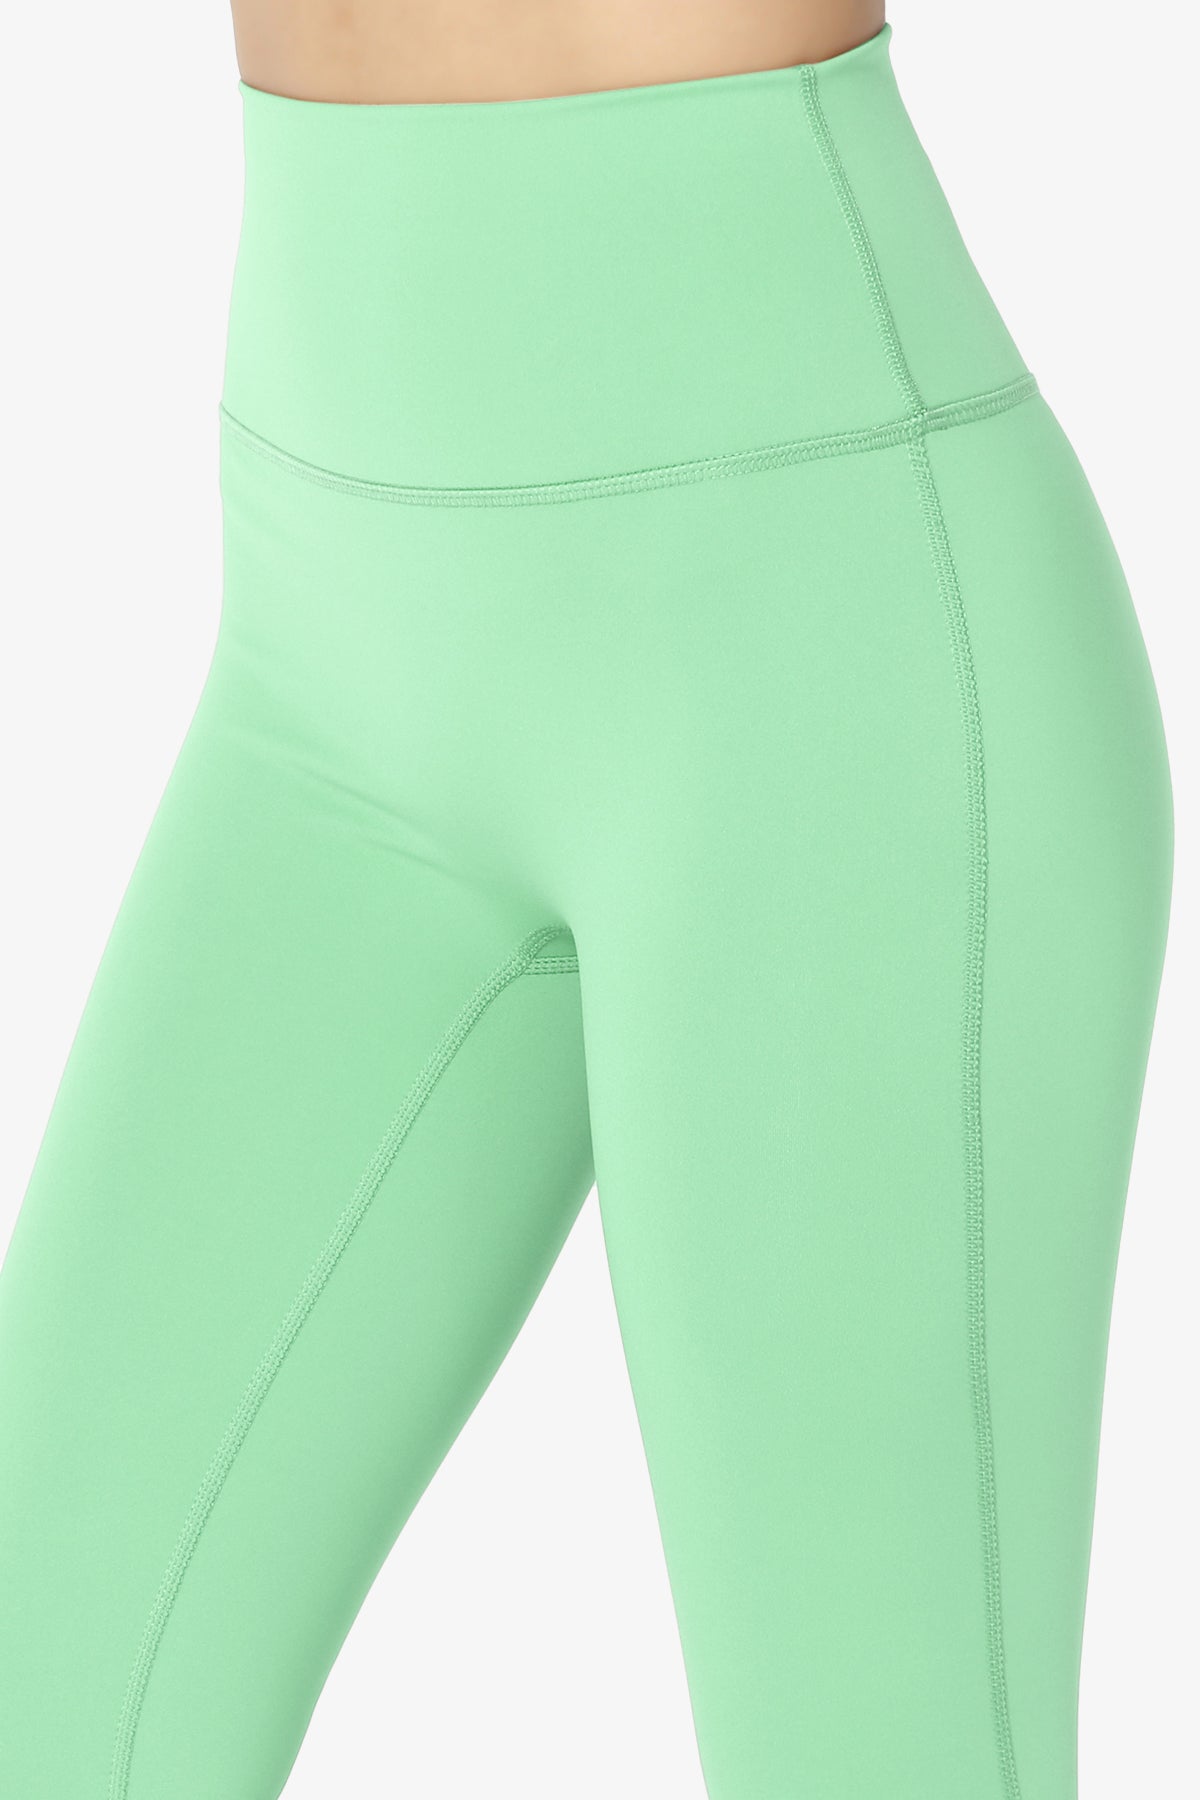 Mosco Athletic Tummy Control Workout Leggings GREEN MINT_5